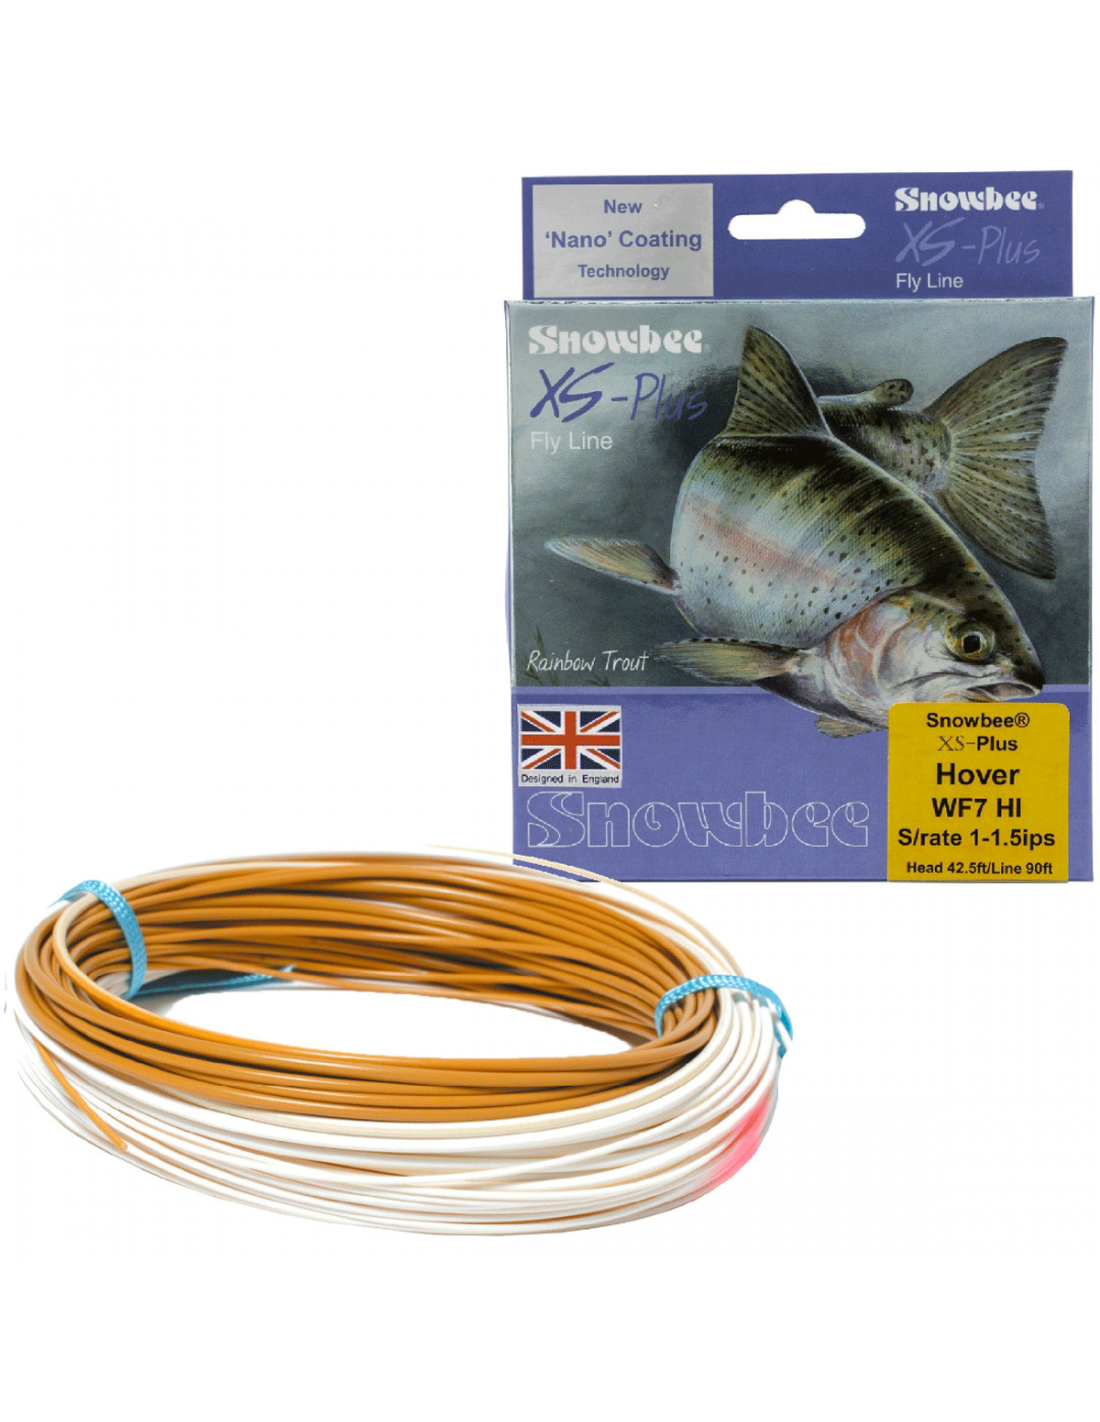 Snowbee WFHI XS-Plus “Hover” Slow Intermediate Fly Line (sink rate 1-1.5ips)